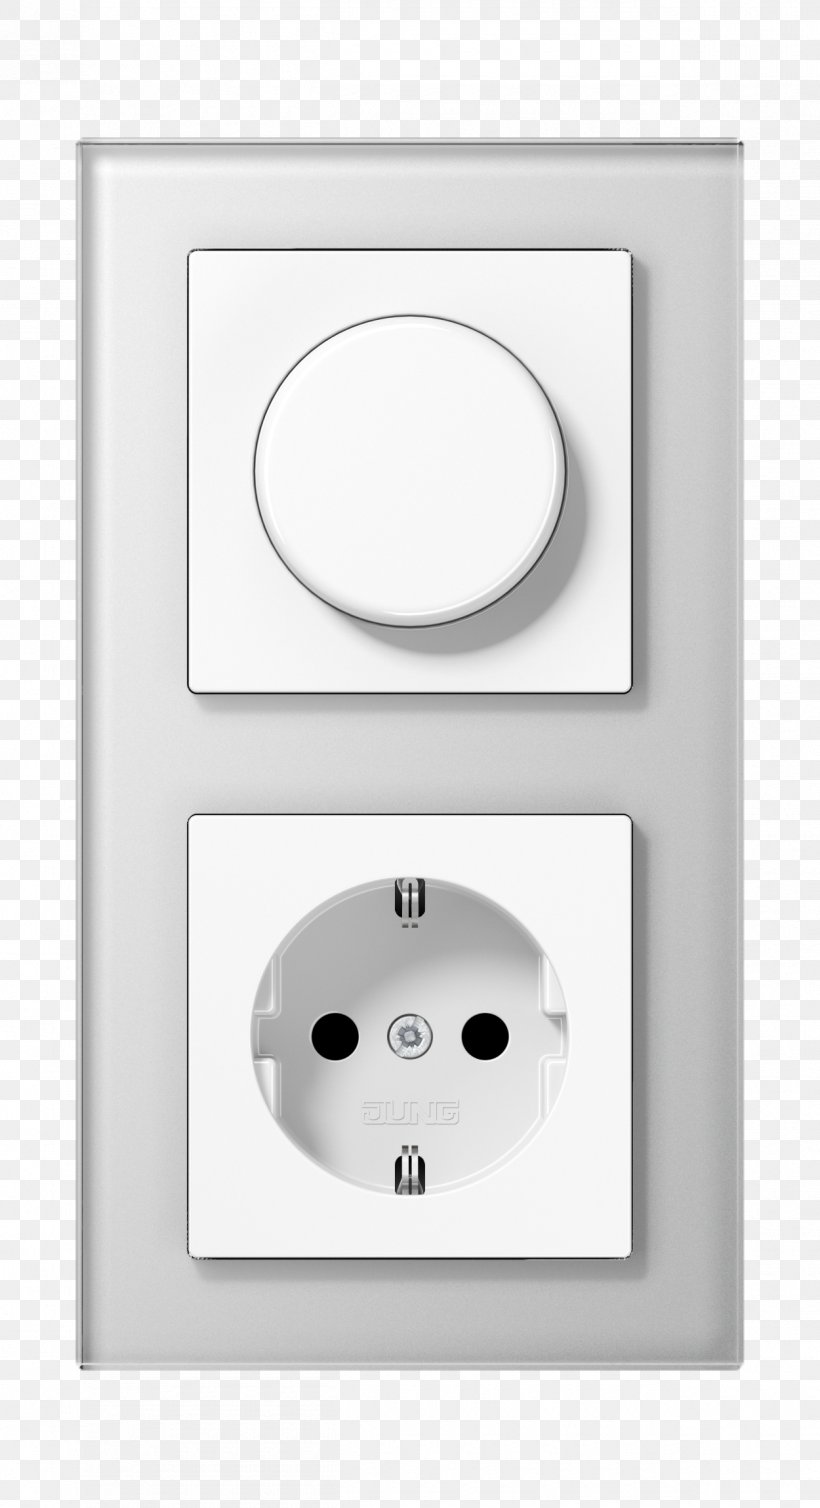 AC Power Plugs And Sockets Esprit Holdings Factory Outlet Shop Network Socket Contactdoos, PNG, 1250x2300px, Ac Power Plugs And Sockets, Ac Power Plugs And Socket Outlets, Art, Contactdoos, Esprit Holdings Download Free